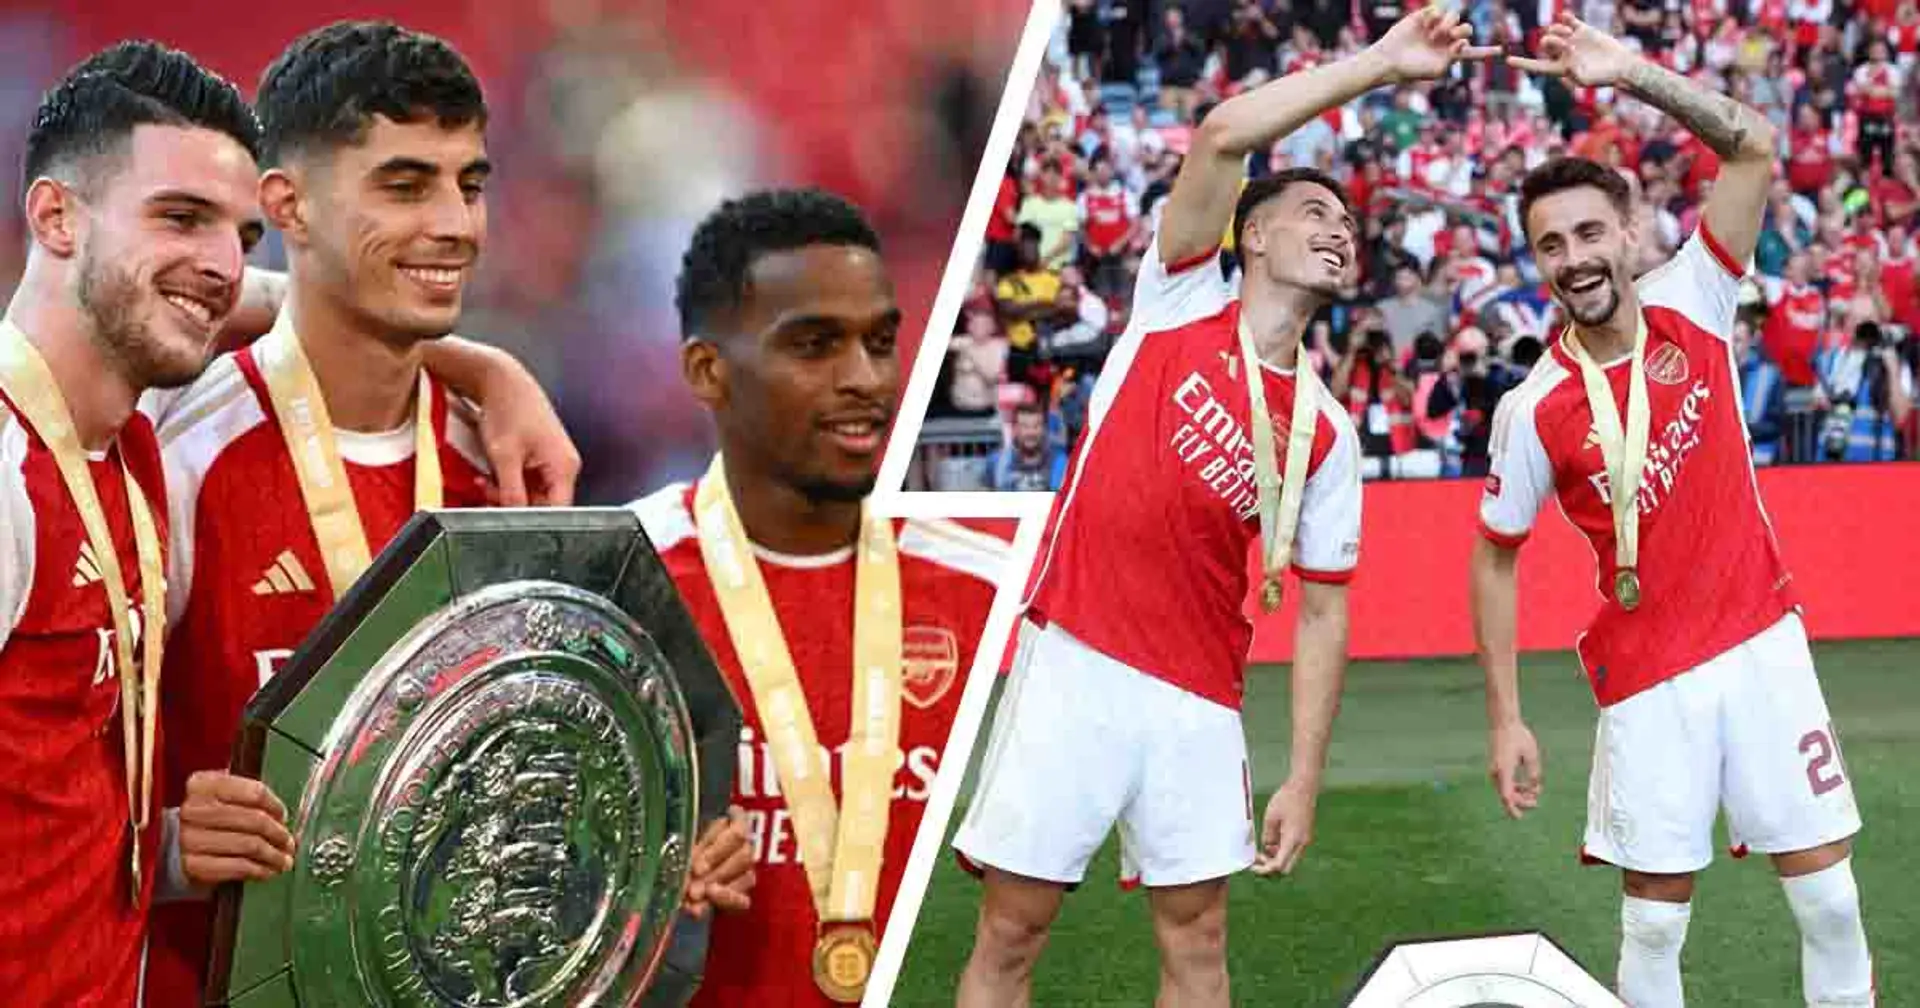 6 best pics of Arsenal stars celebrating with Community Shield trophy after Man City win